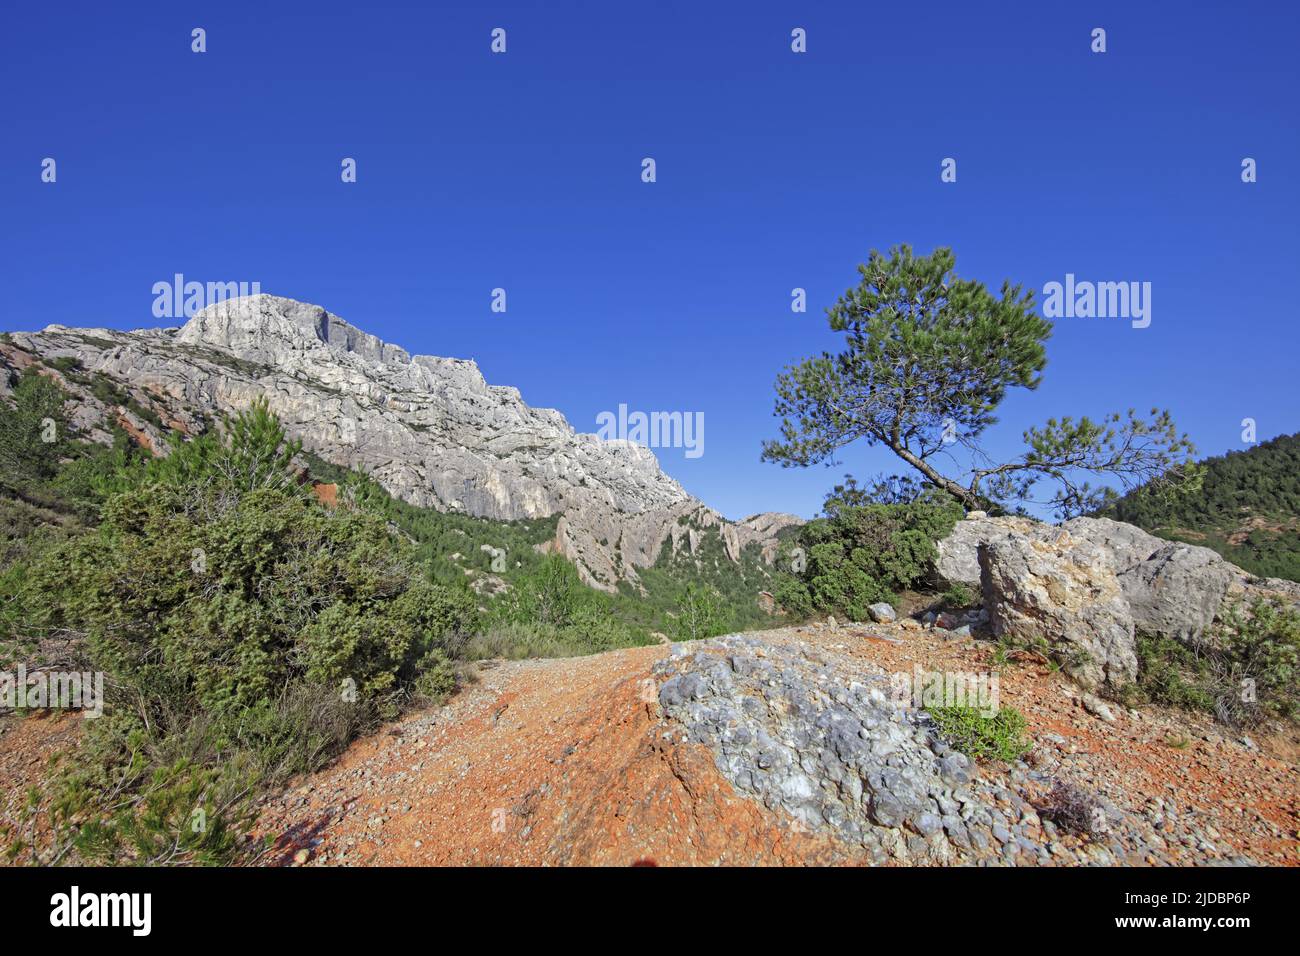 France, Bouches-du-Rhône Aix-en-Provence, the Sainte-Victoire mountain, seen from the pink marble aggregates Stock Photo